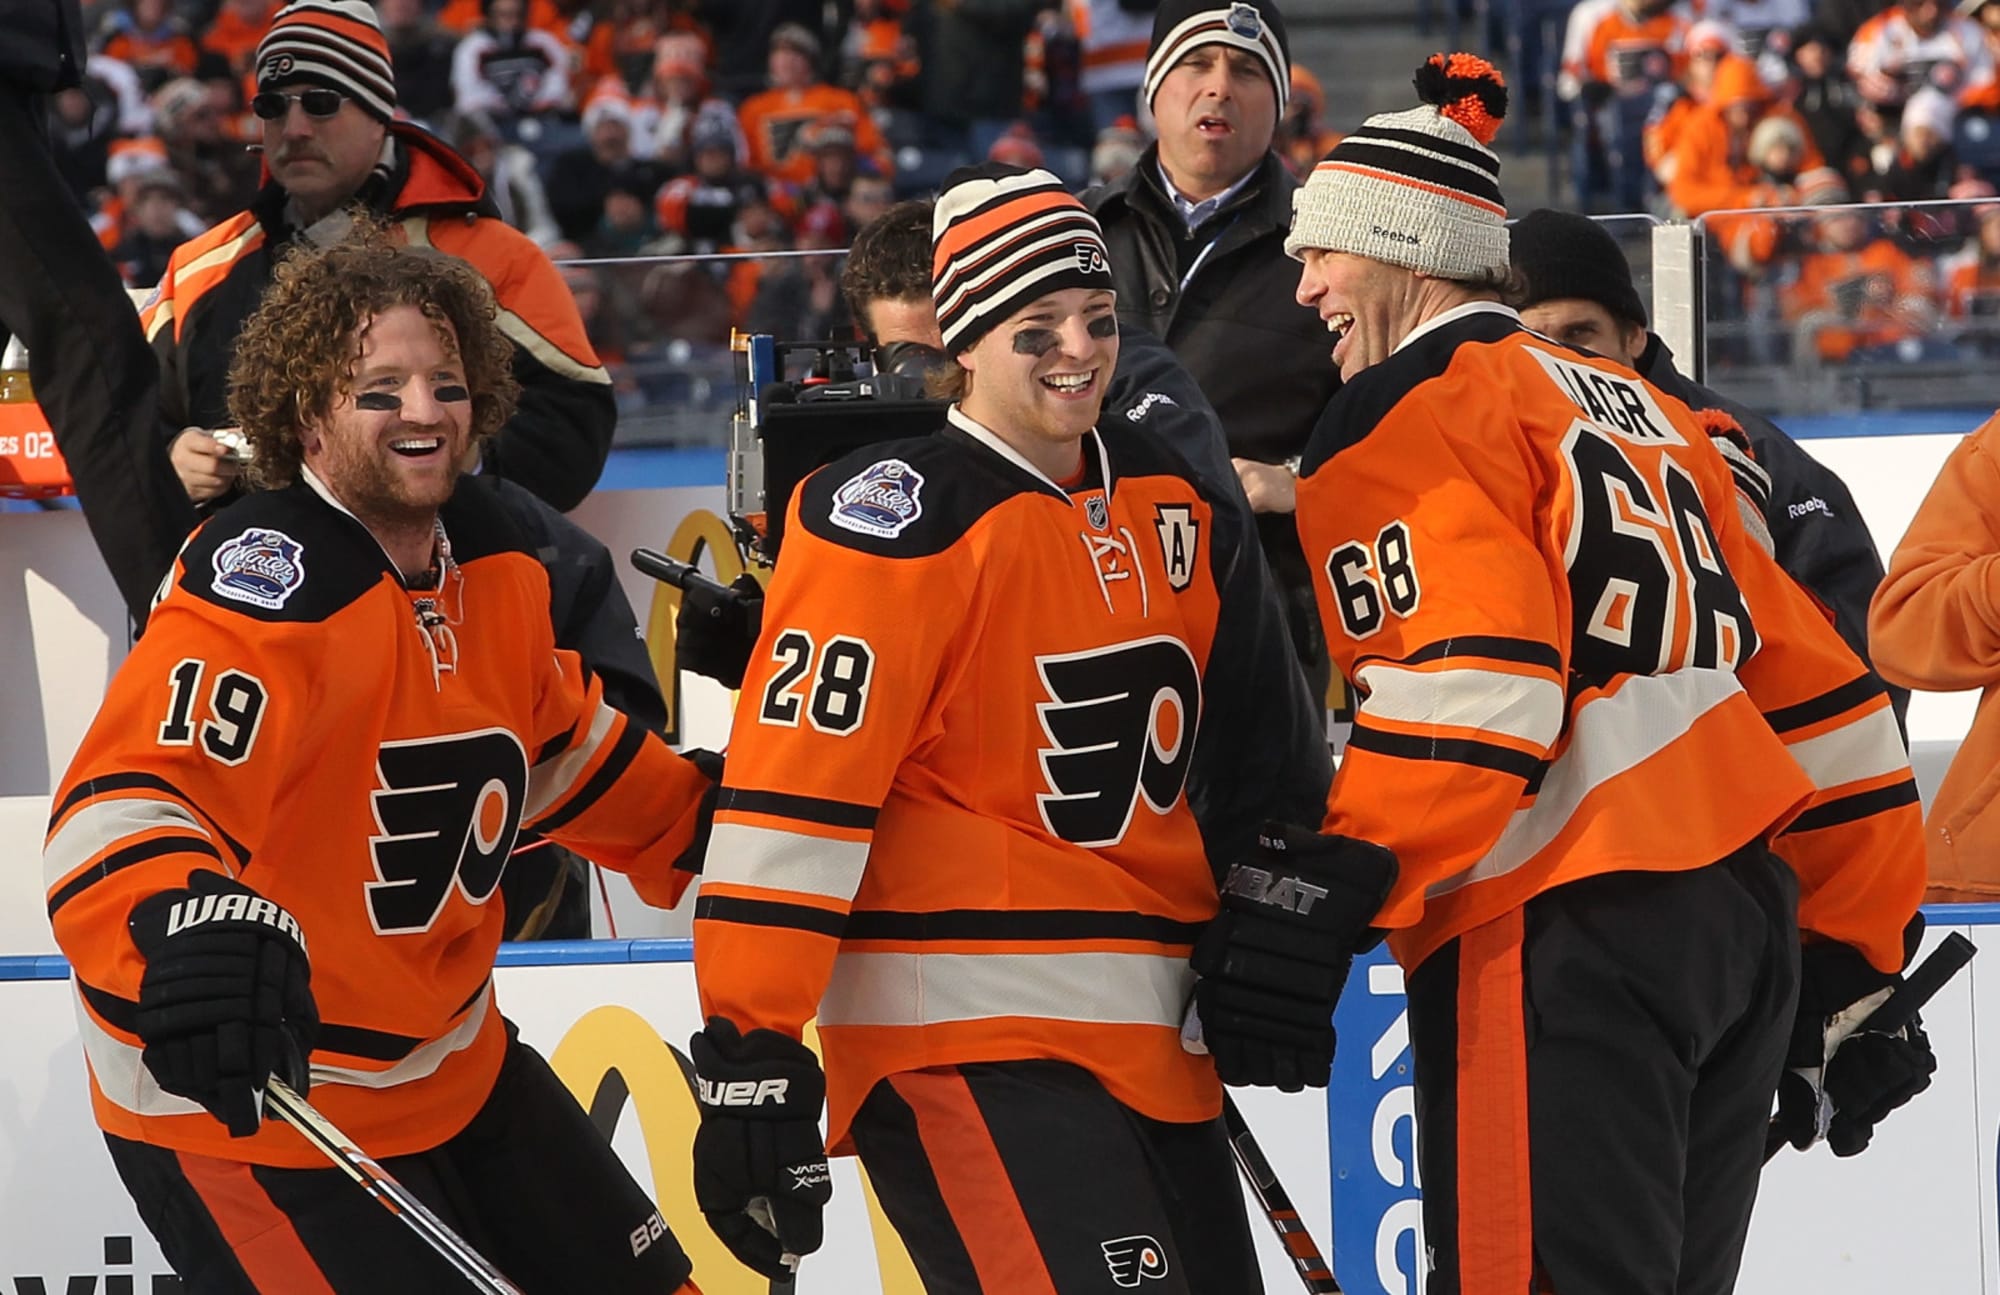 Rumored Photos of Winter Classic Jerseys for Flyers, Rangers